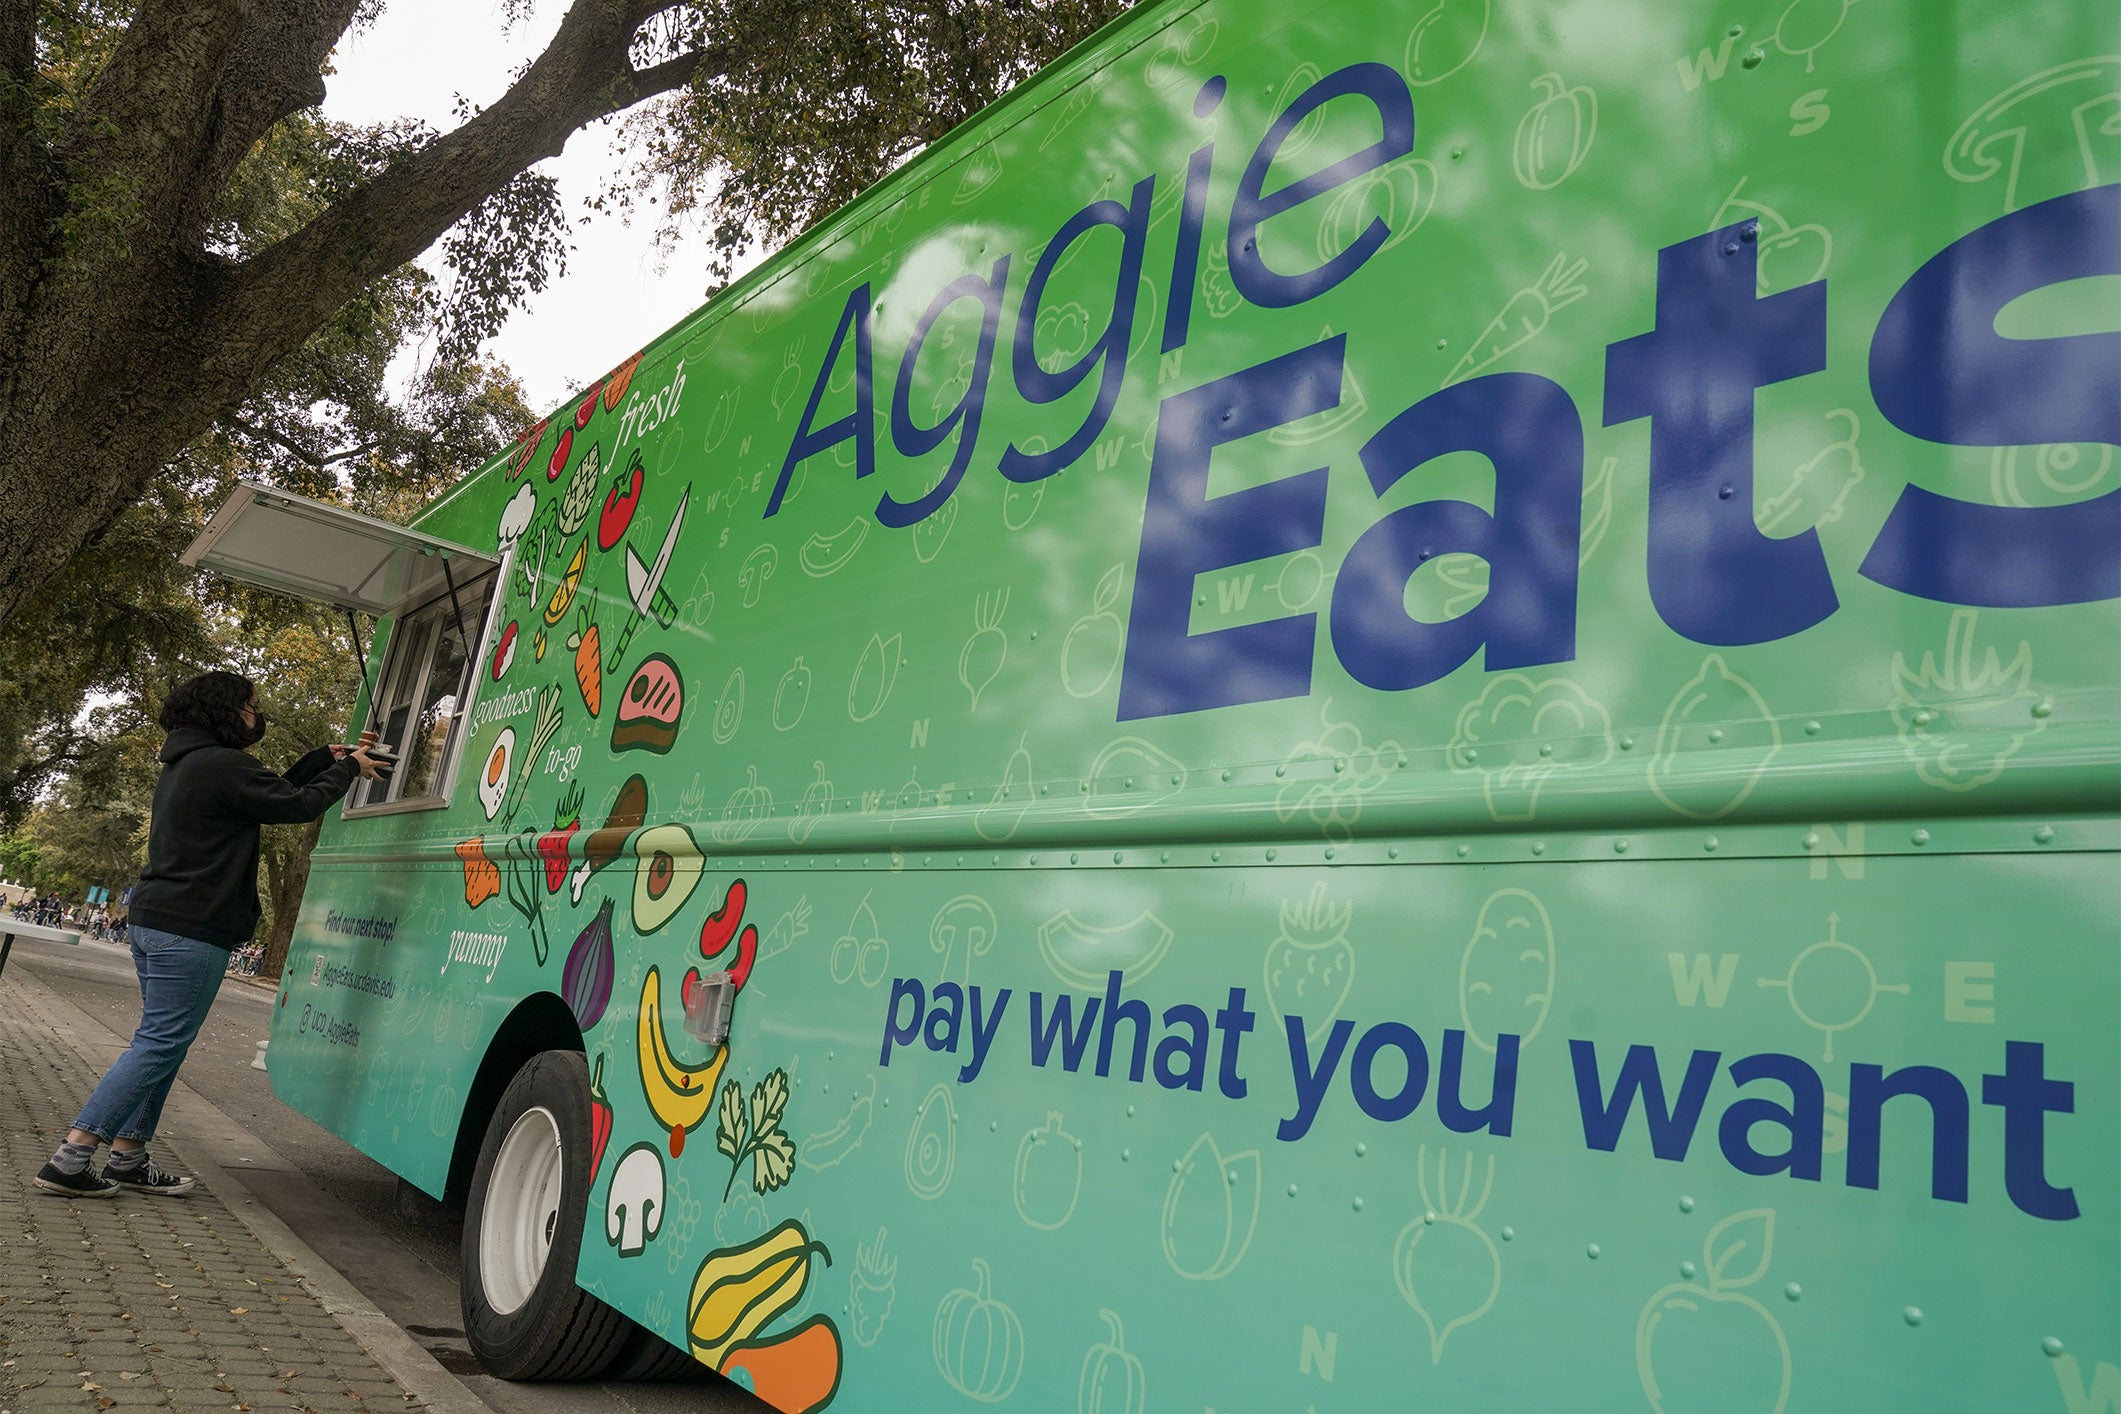 C Davis' "Aggie Eats" food truck offers nutritious meals on a "pay what you want" basis to support food security among students, part of the university's student affairs initiative. (SAMC/UC Davis)